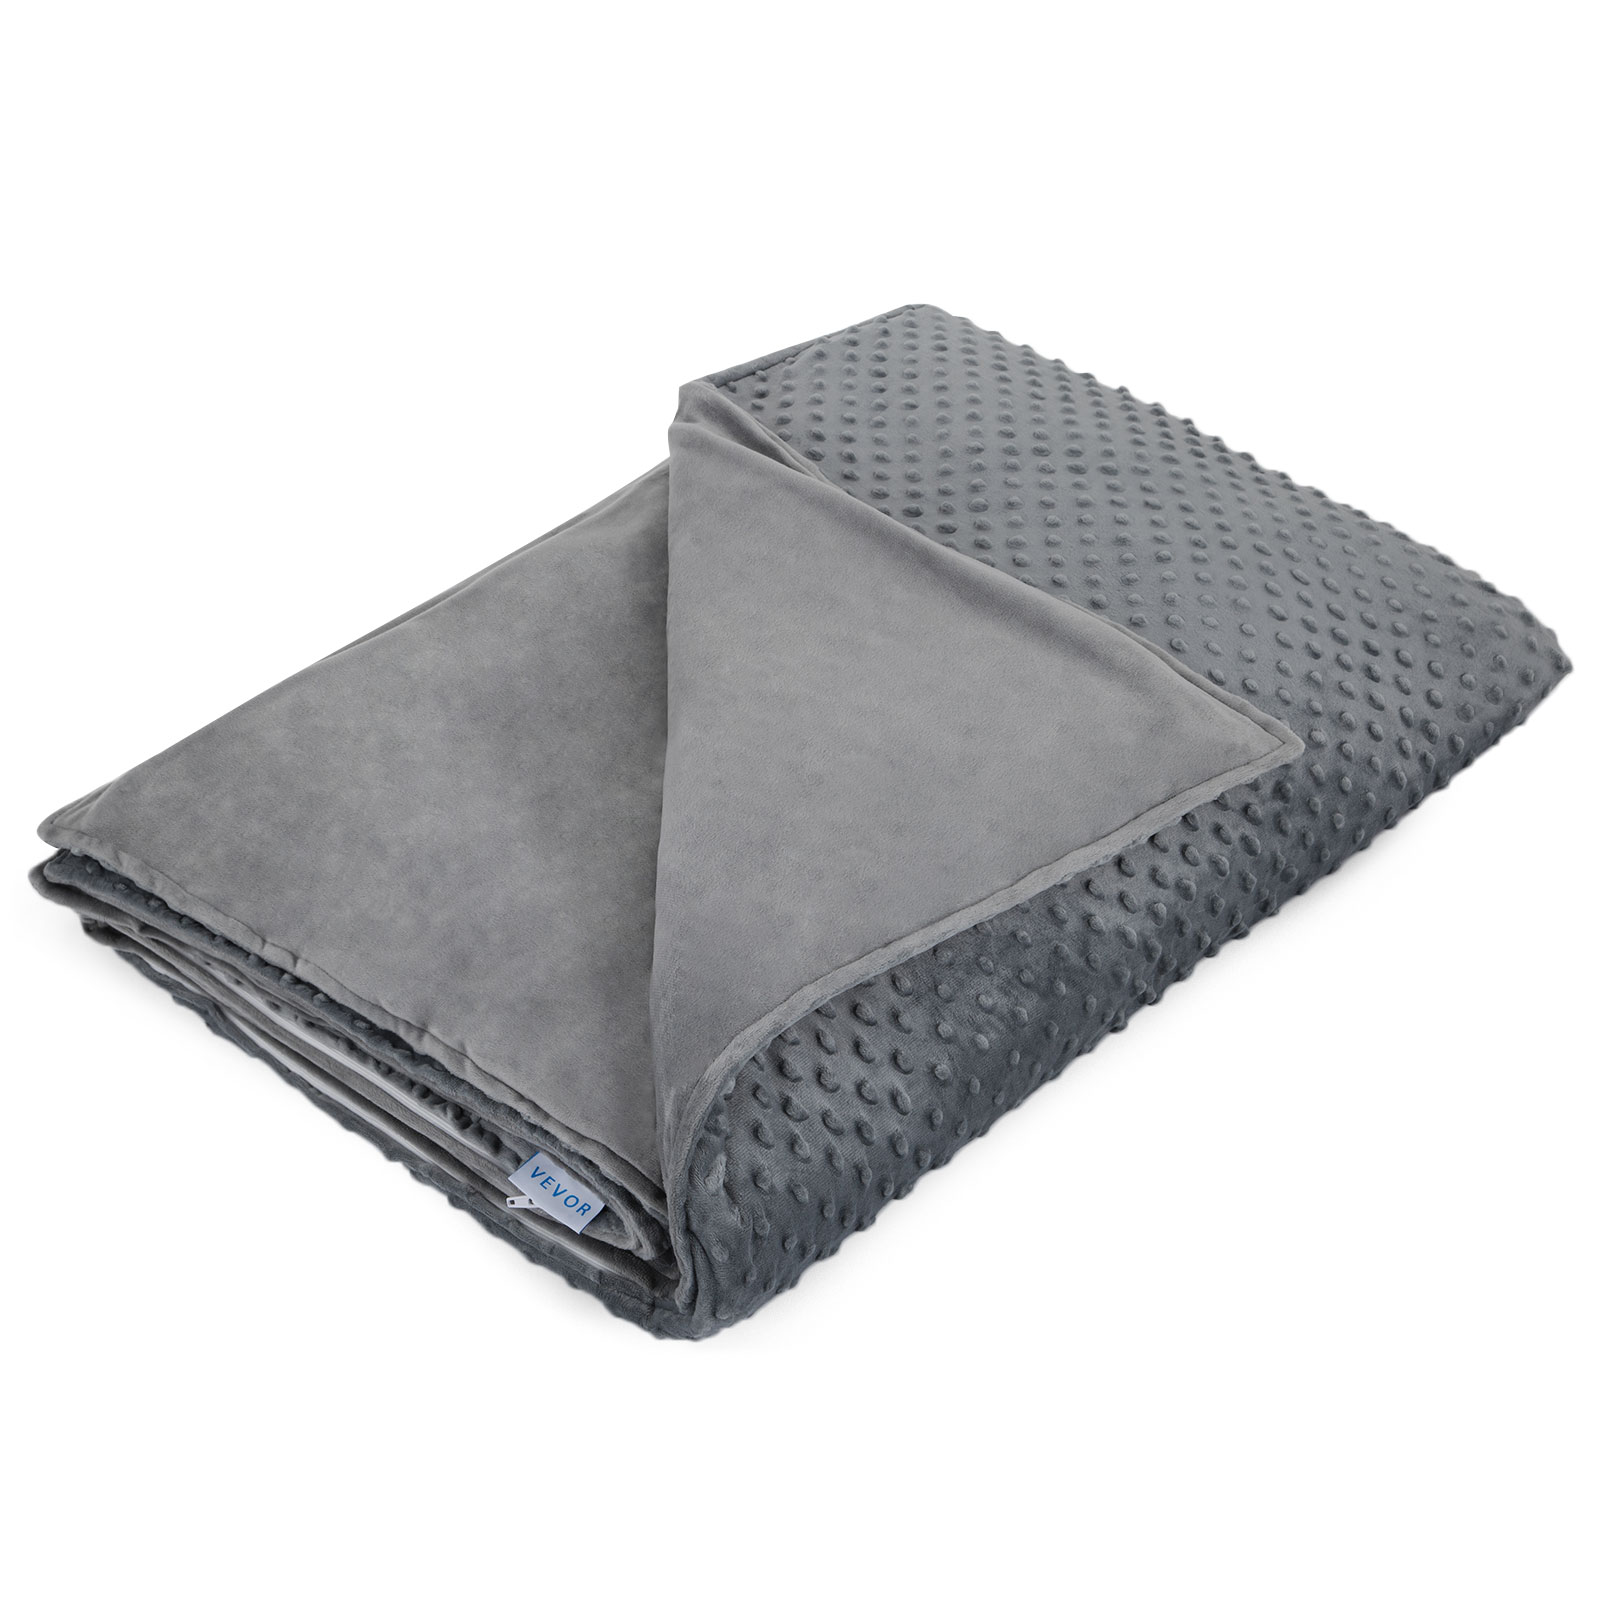 6.8KG Premium Weighted Blanket Deep Sleep with Cover for Kid/Adult